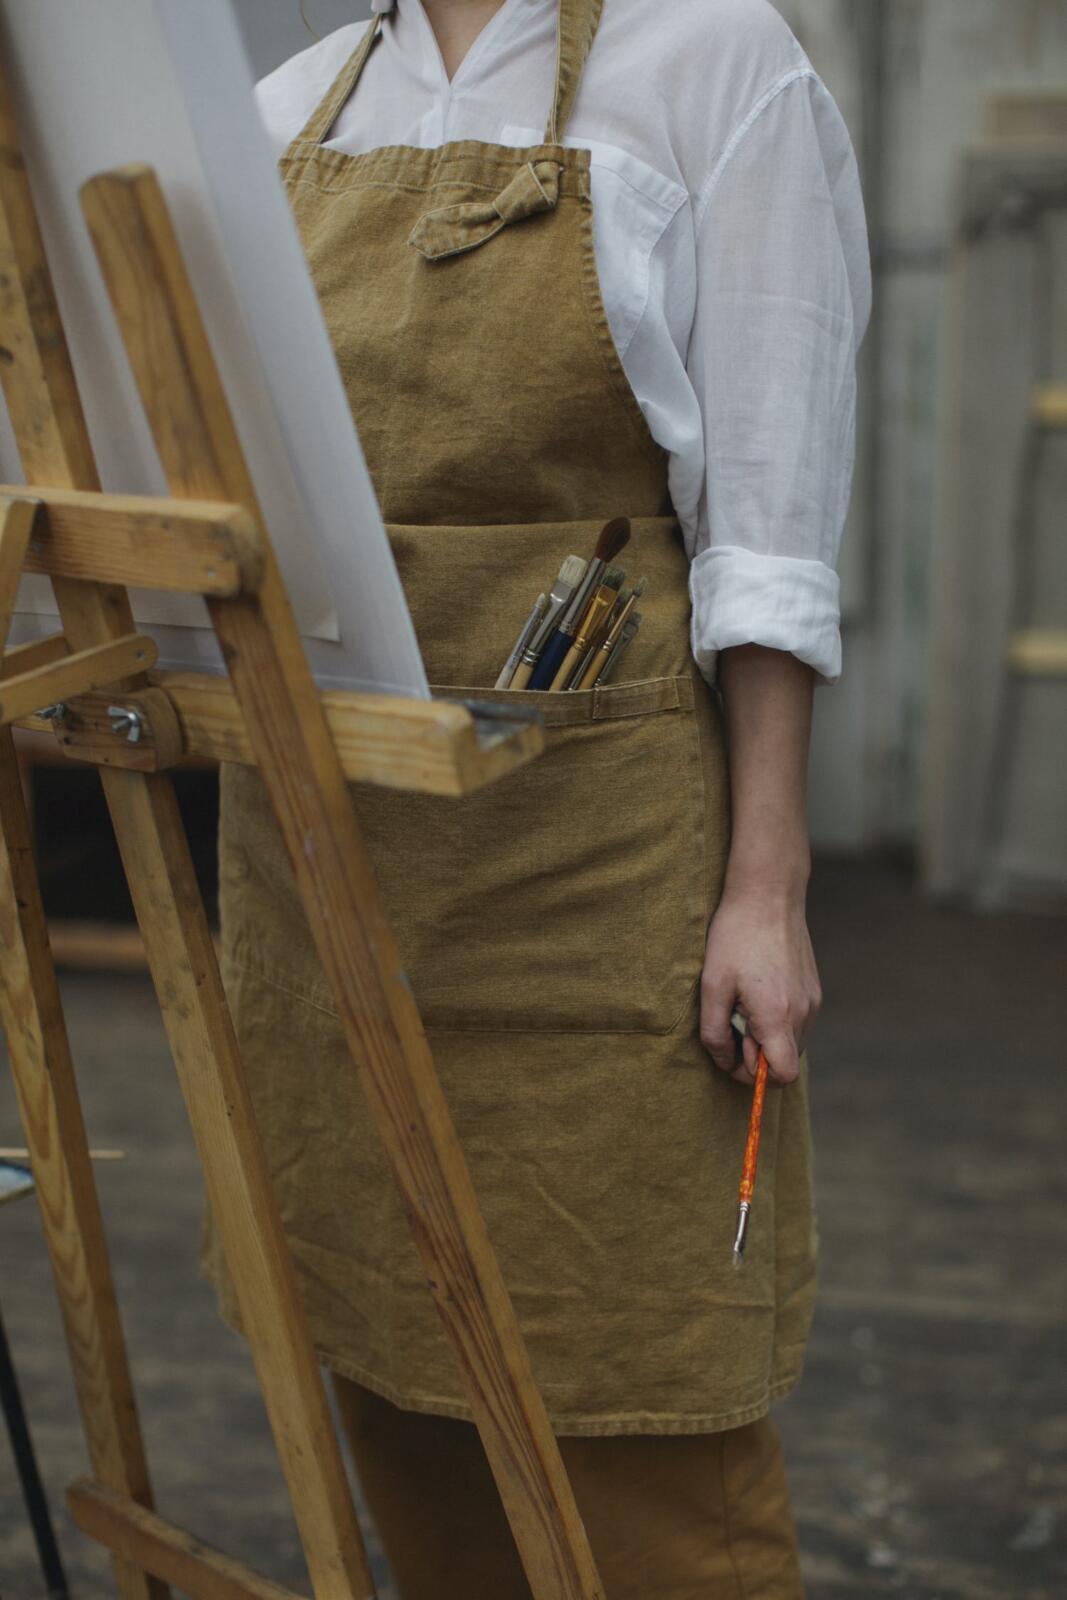 A woman in an apron is painting a portrait on an easel.